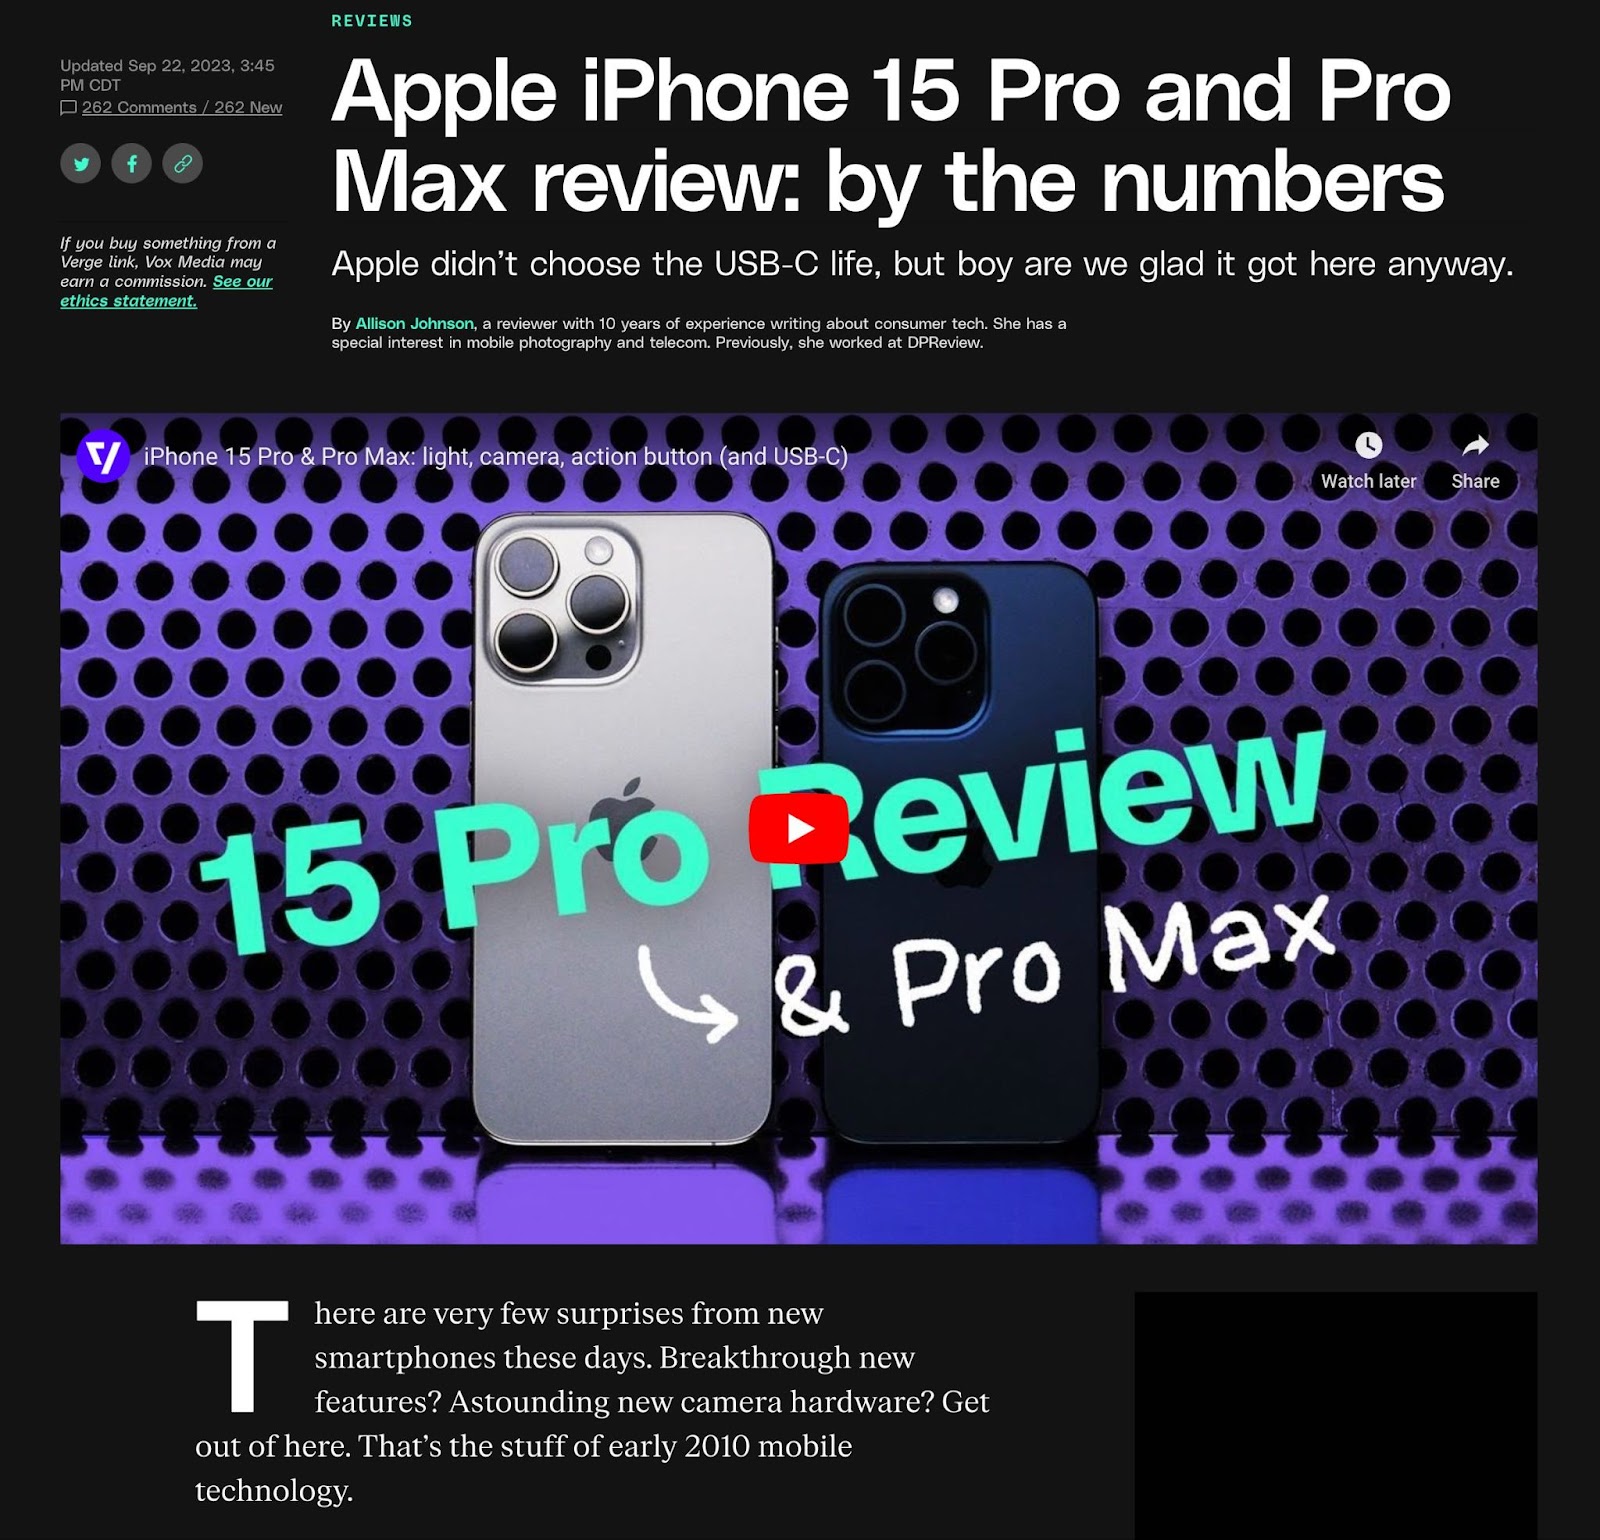 The Verge's review of the new iPhone 15 Pro and Pro Max, with video embedded on the page